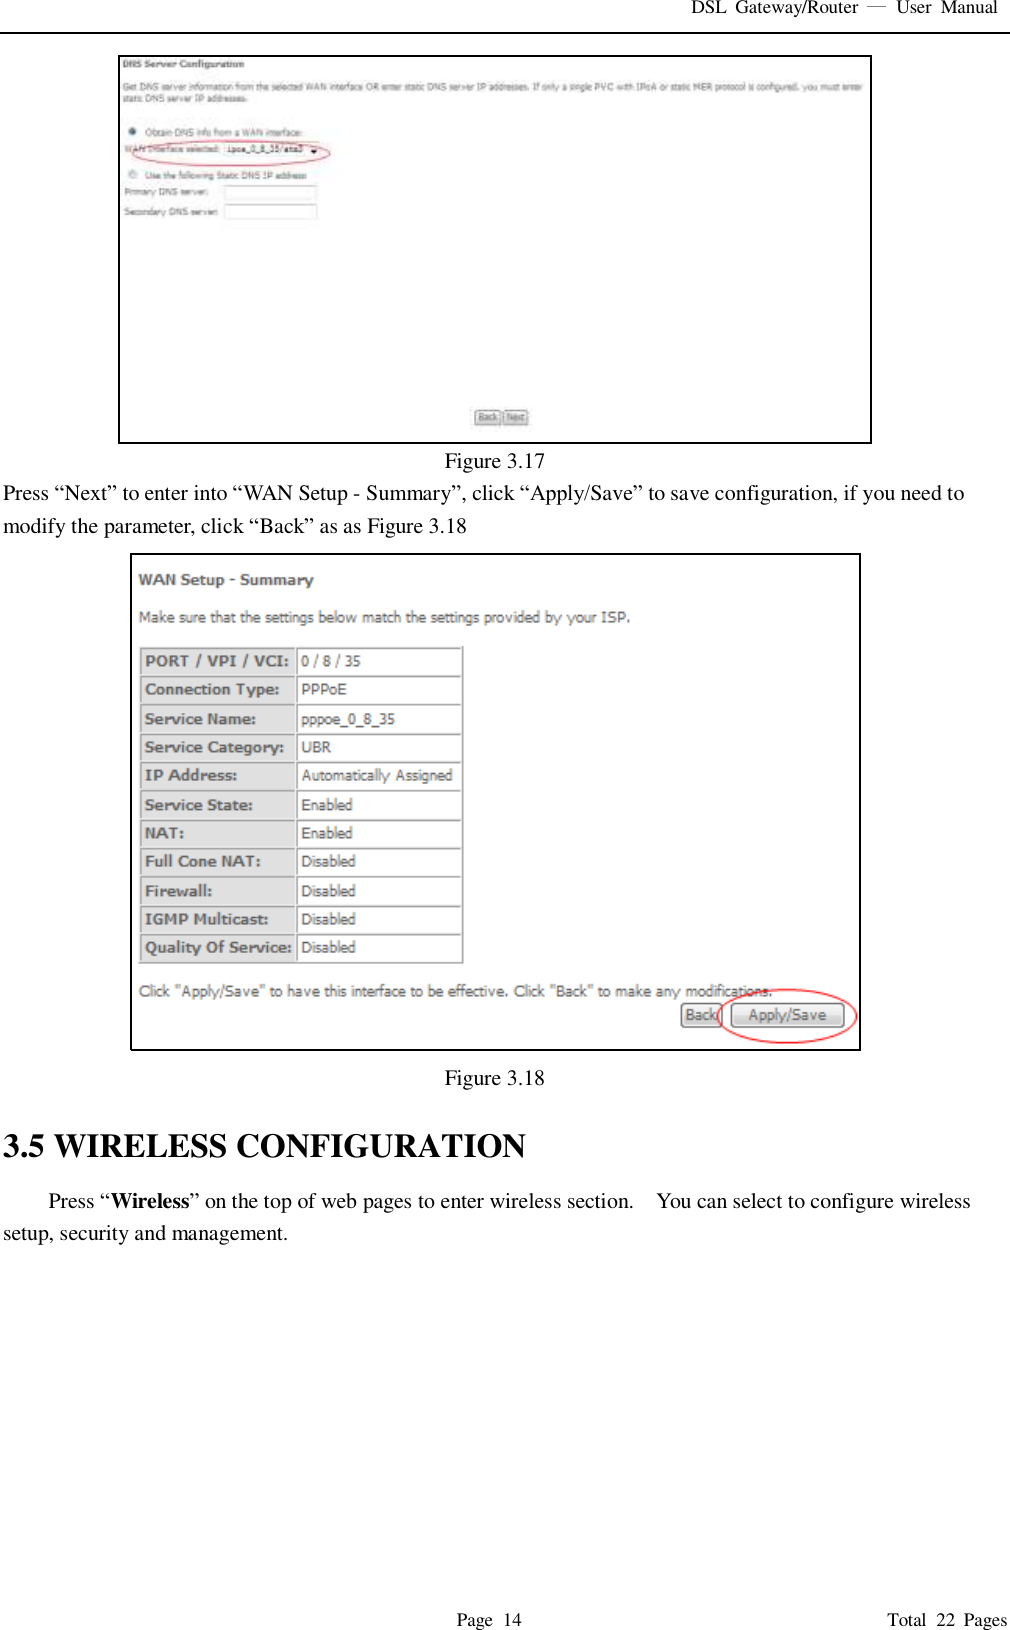 DSL  Gateway/Router    User  Manual   Page  14                                                                              Total  22  Pages  Figure 3.17 Press “Next” to enter into “WAN Setup - Summary”, click “Apply/Save” to save configuration, if you need to modify the parameter, click “Back” as as Figure 3.18  Figure 3.18  3.5 WIRELESS CONFIGURATION Press “Wireless” on the top of web pages to enter wireless section.    You can select to configure wireless setup, security and management.   